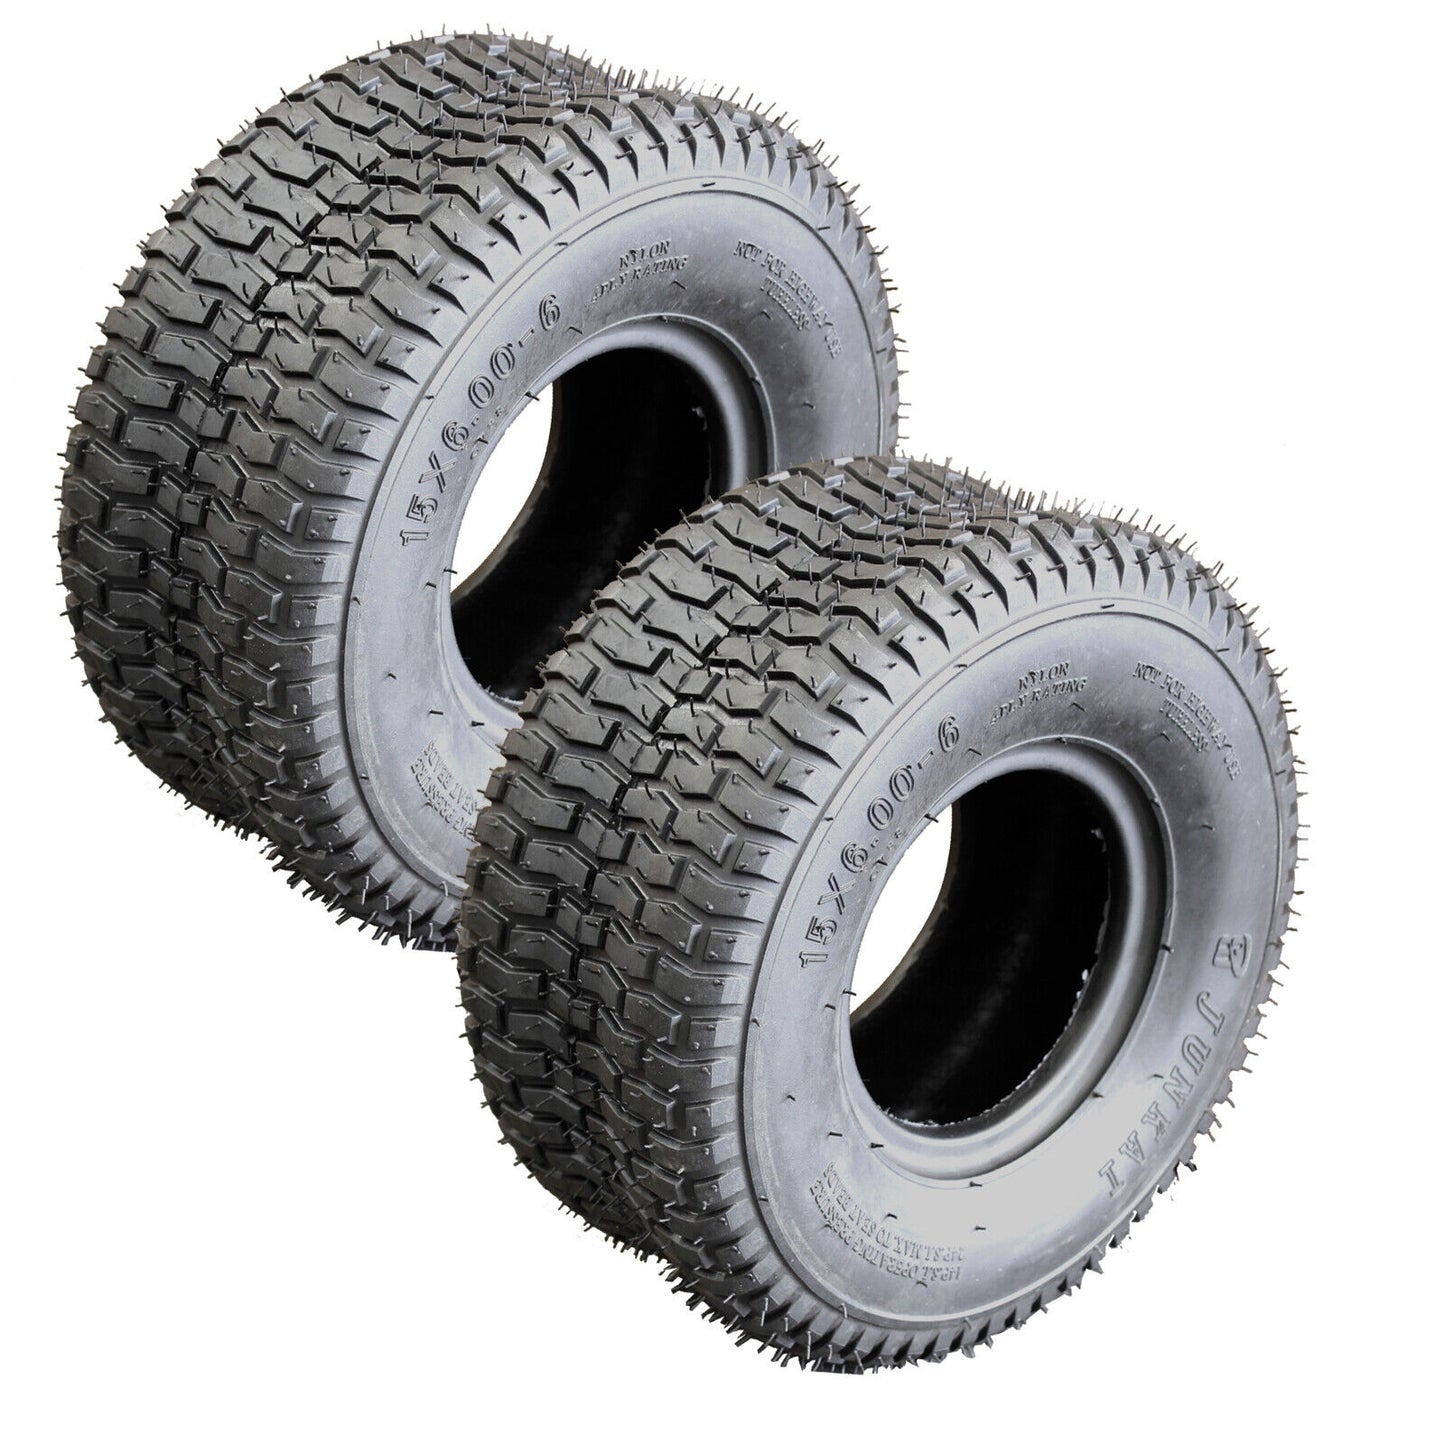 2x Ride on Mower Tyre 4 Ply Turf 15 x 6.00 - 6" inch Commercial Tubeless Tire